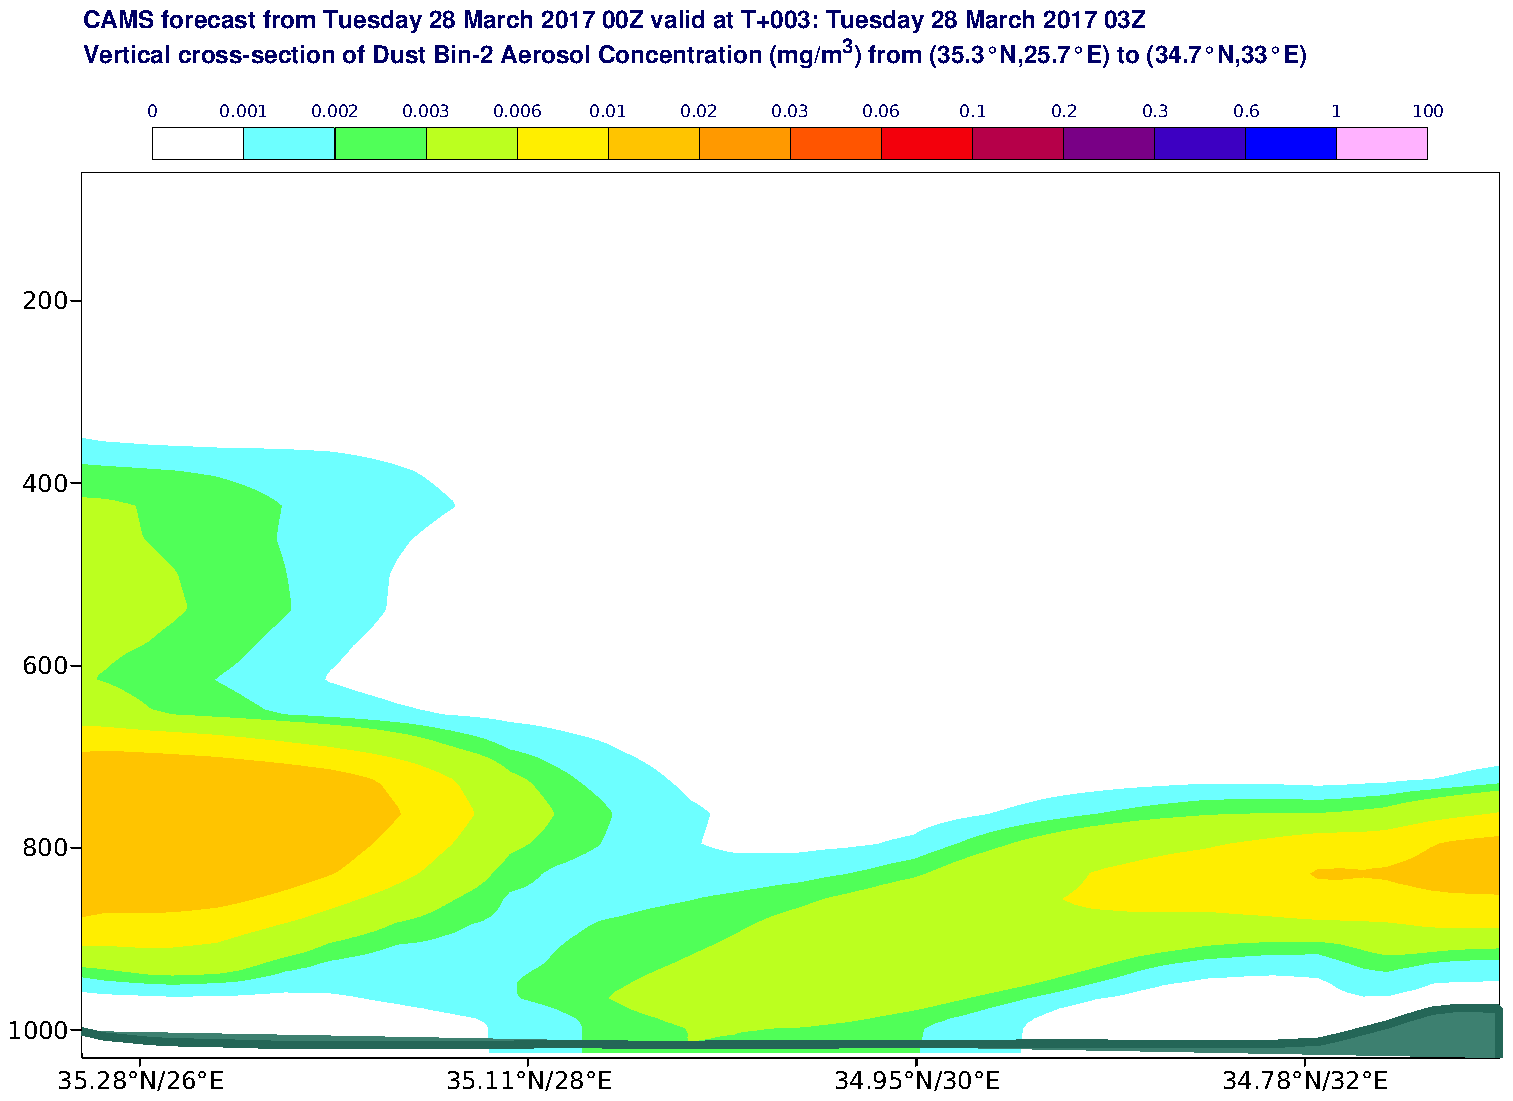 Vertical cross-section of Dust Bin-2 Aerosol Concentration (mg/m3) valid at T3 - 2017-03-28 03:00